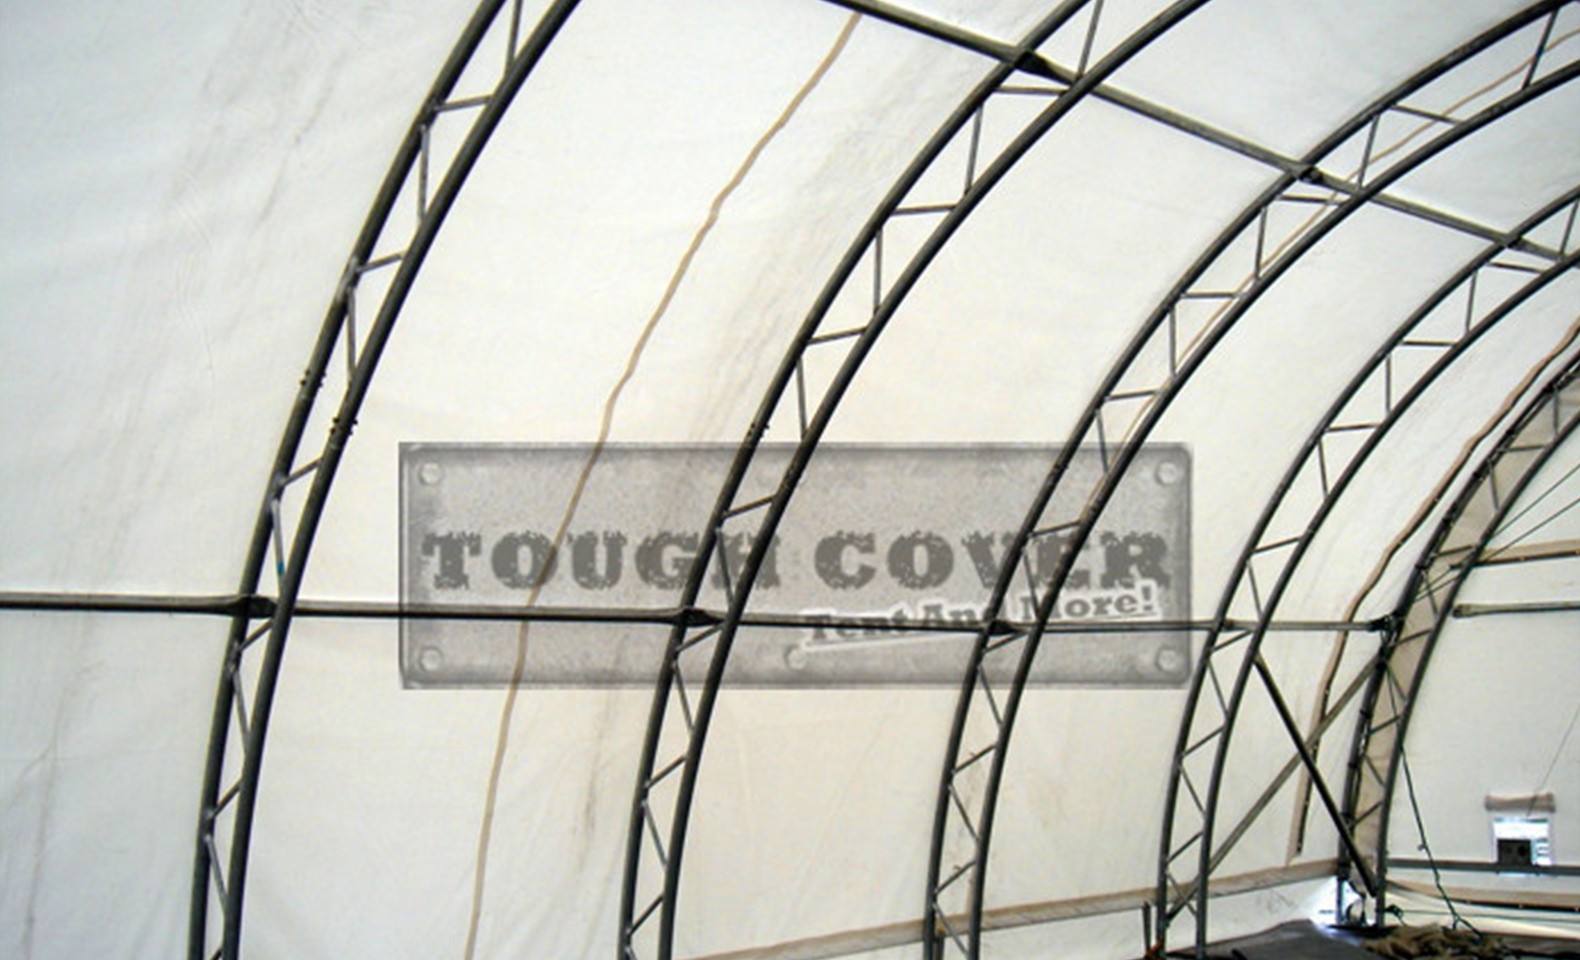 Dome double truss fabric building